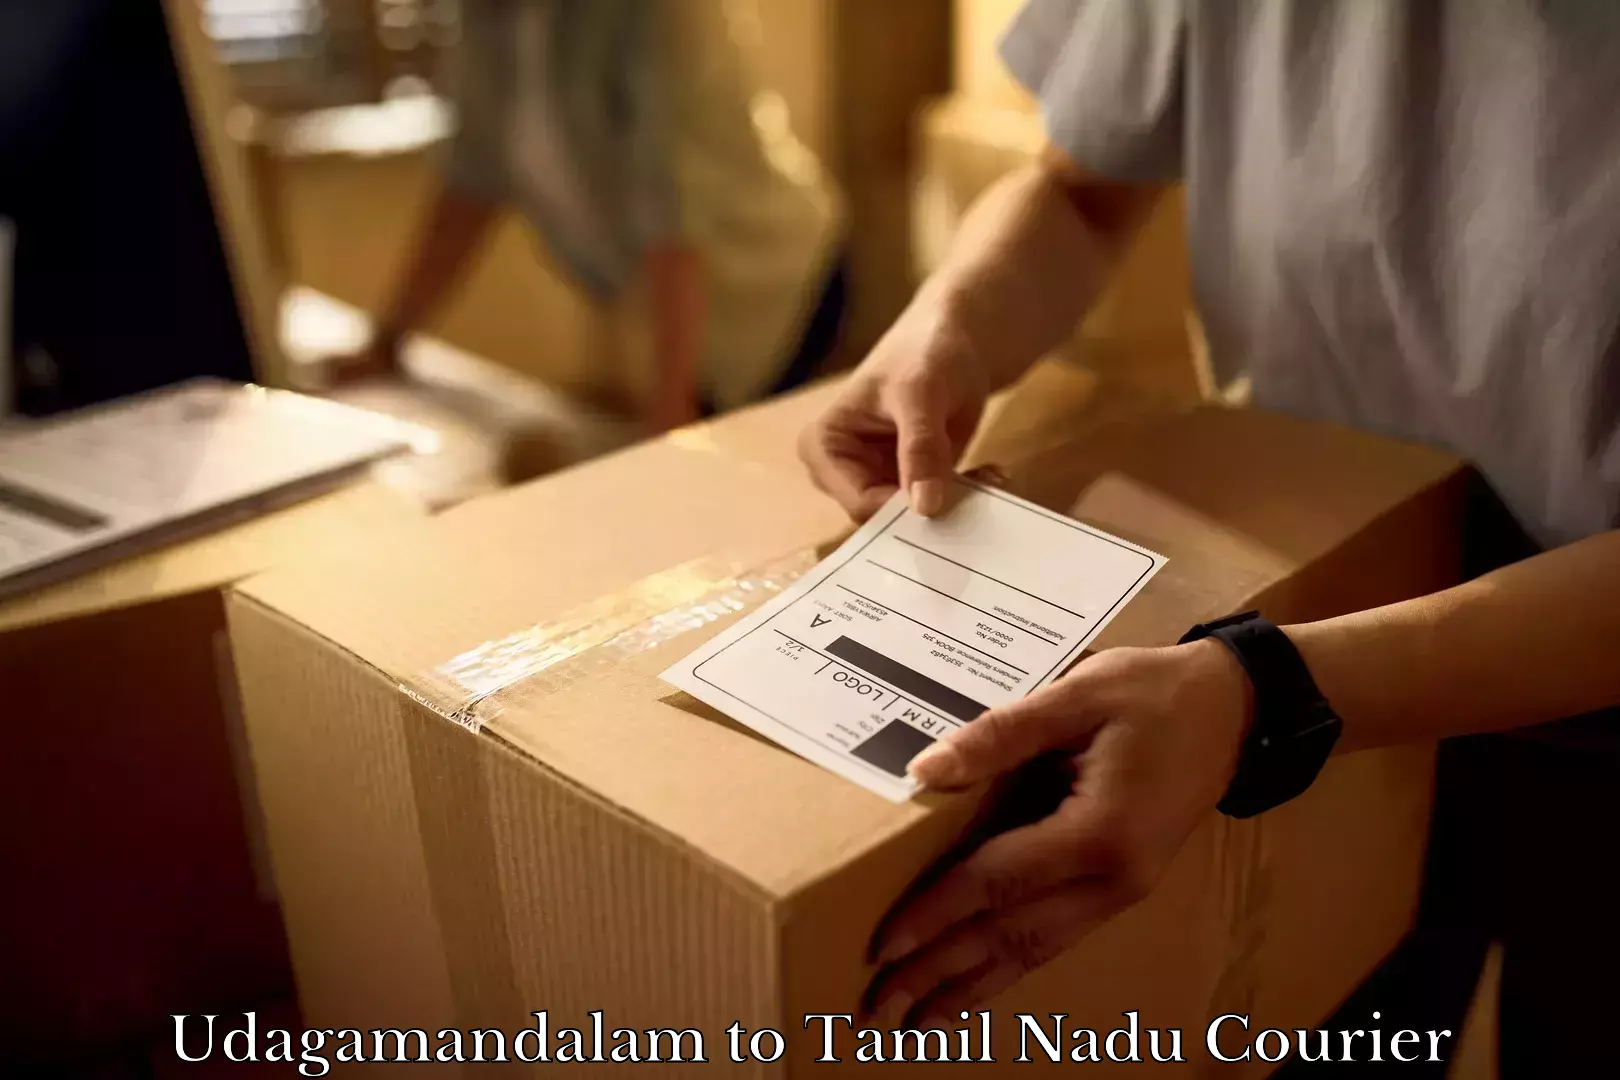 Furniture moving experts Udagamandalam to SRM Institute of Science and Technology Chennai